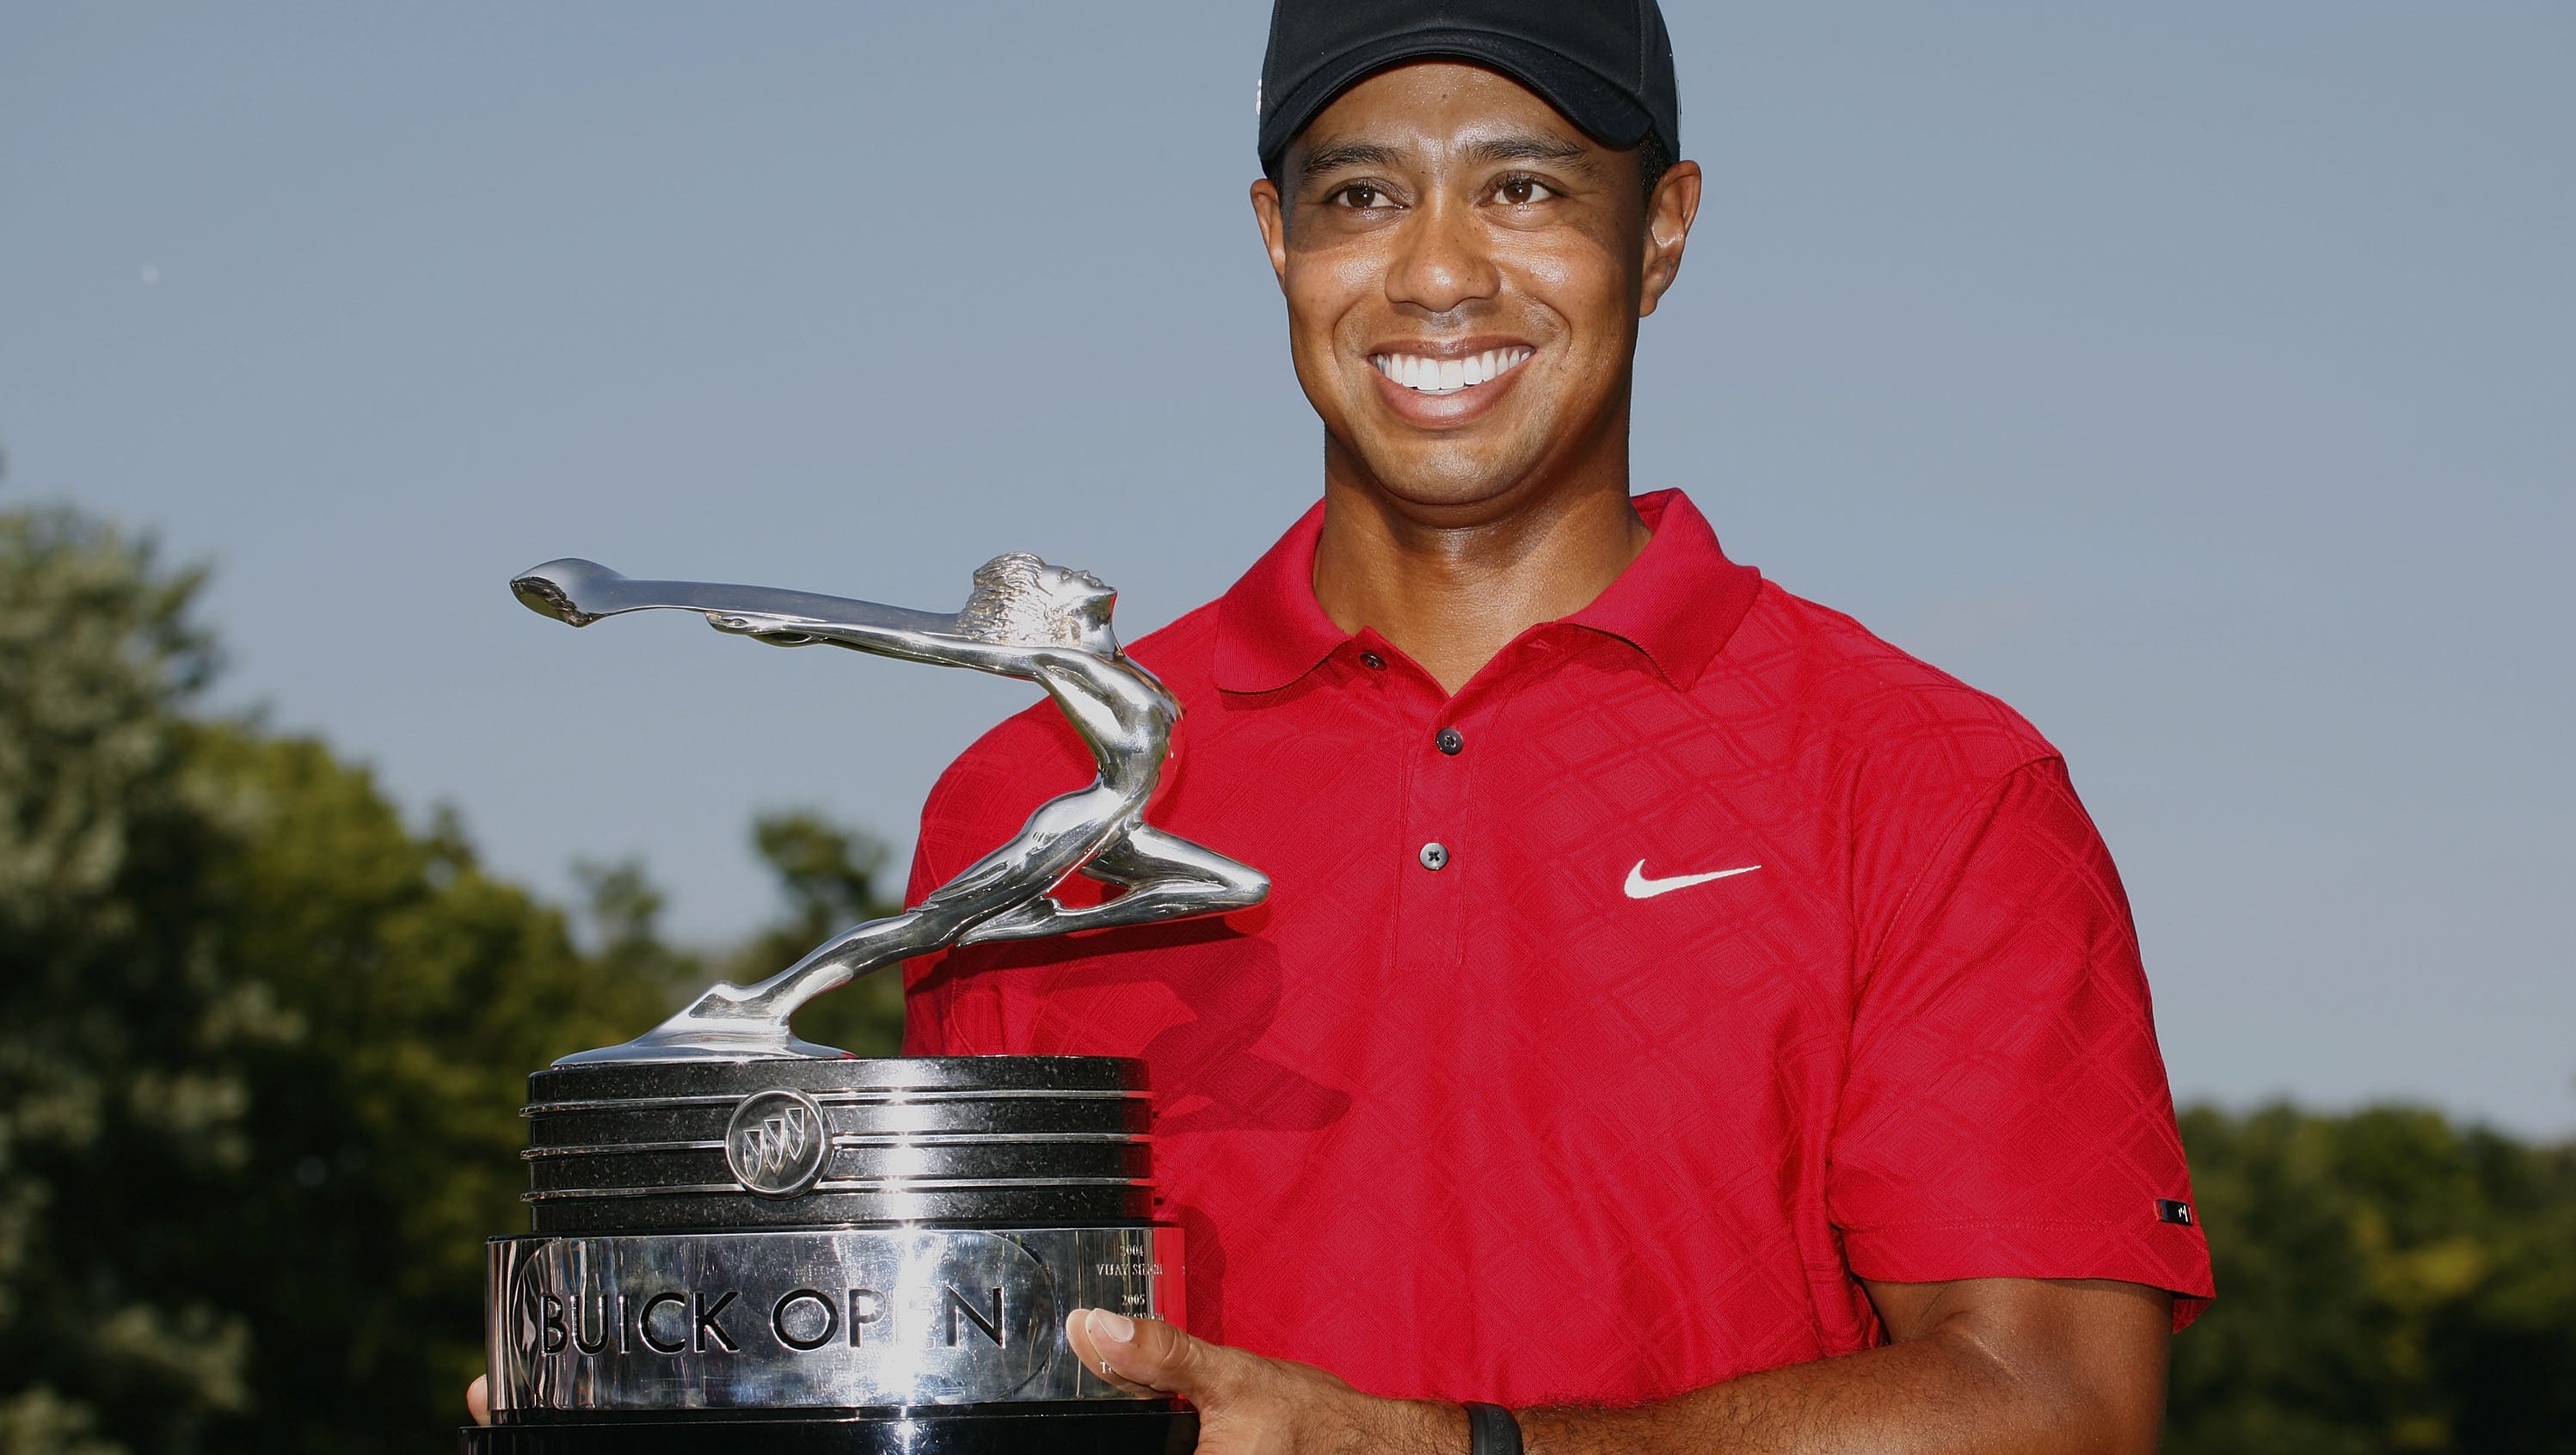 Tiger Woods holds up the trophy after winning the 2009 Buick Open, the final Buick Open.